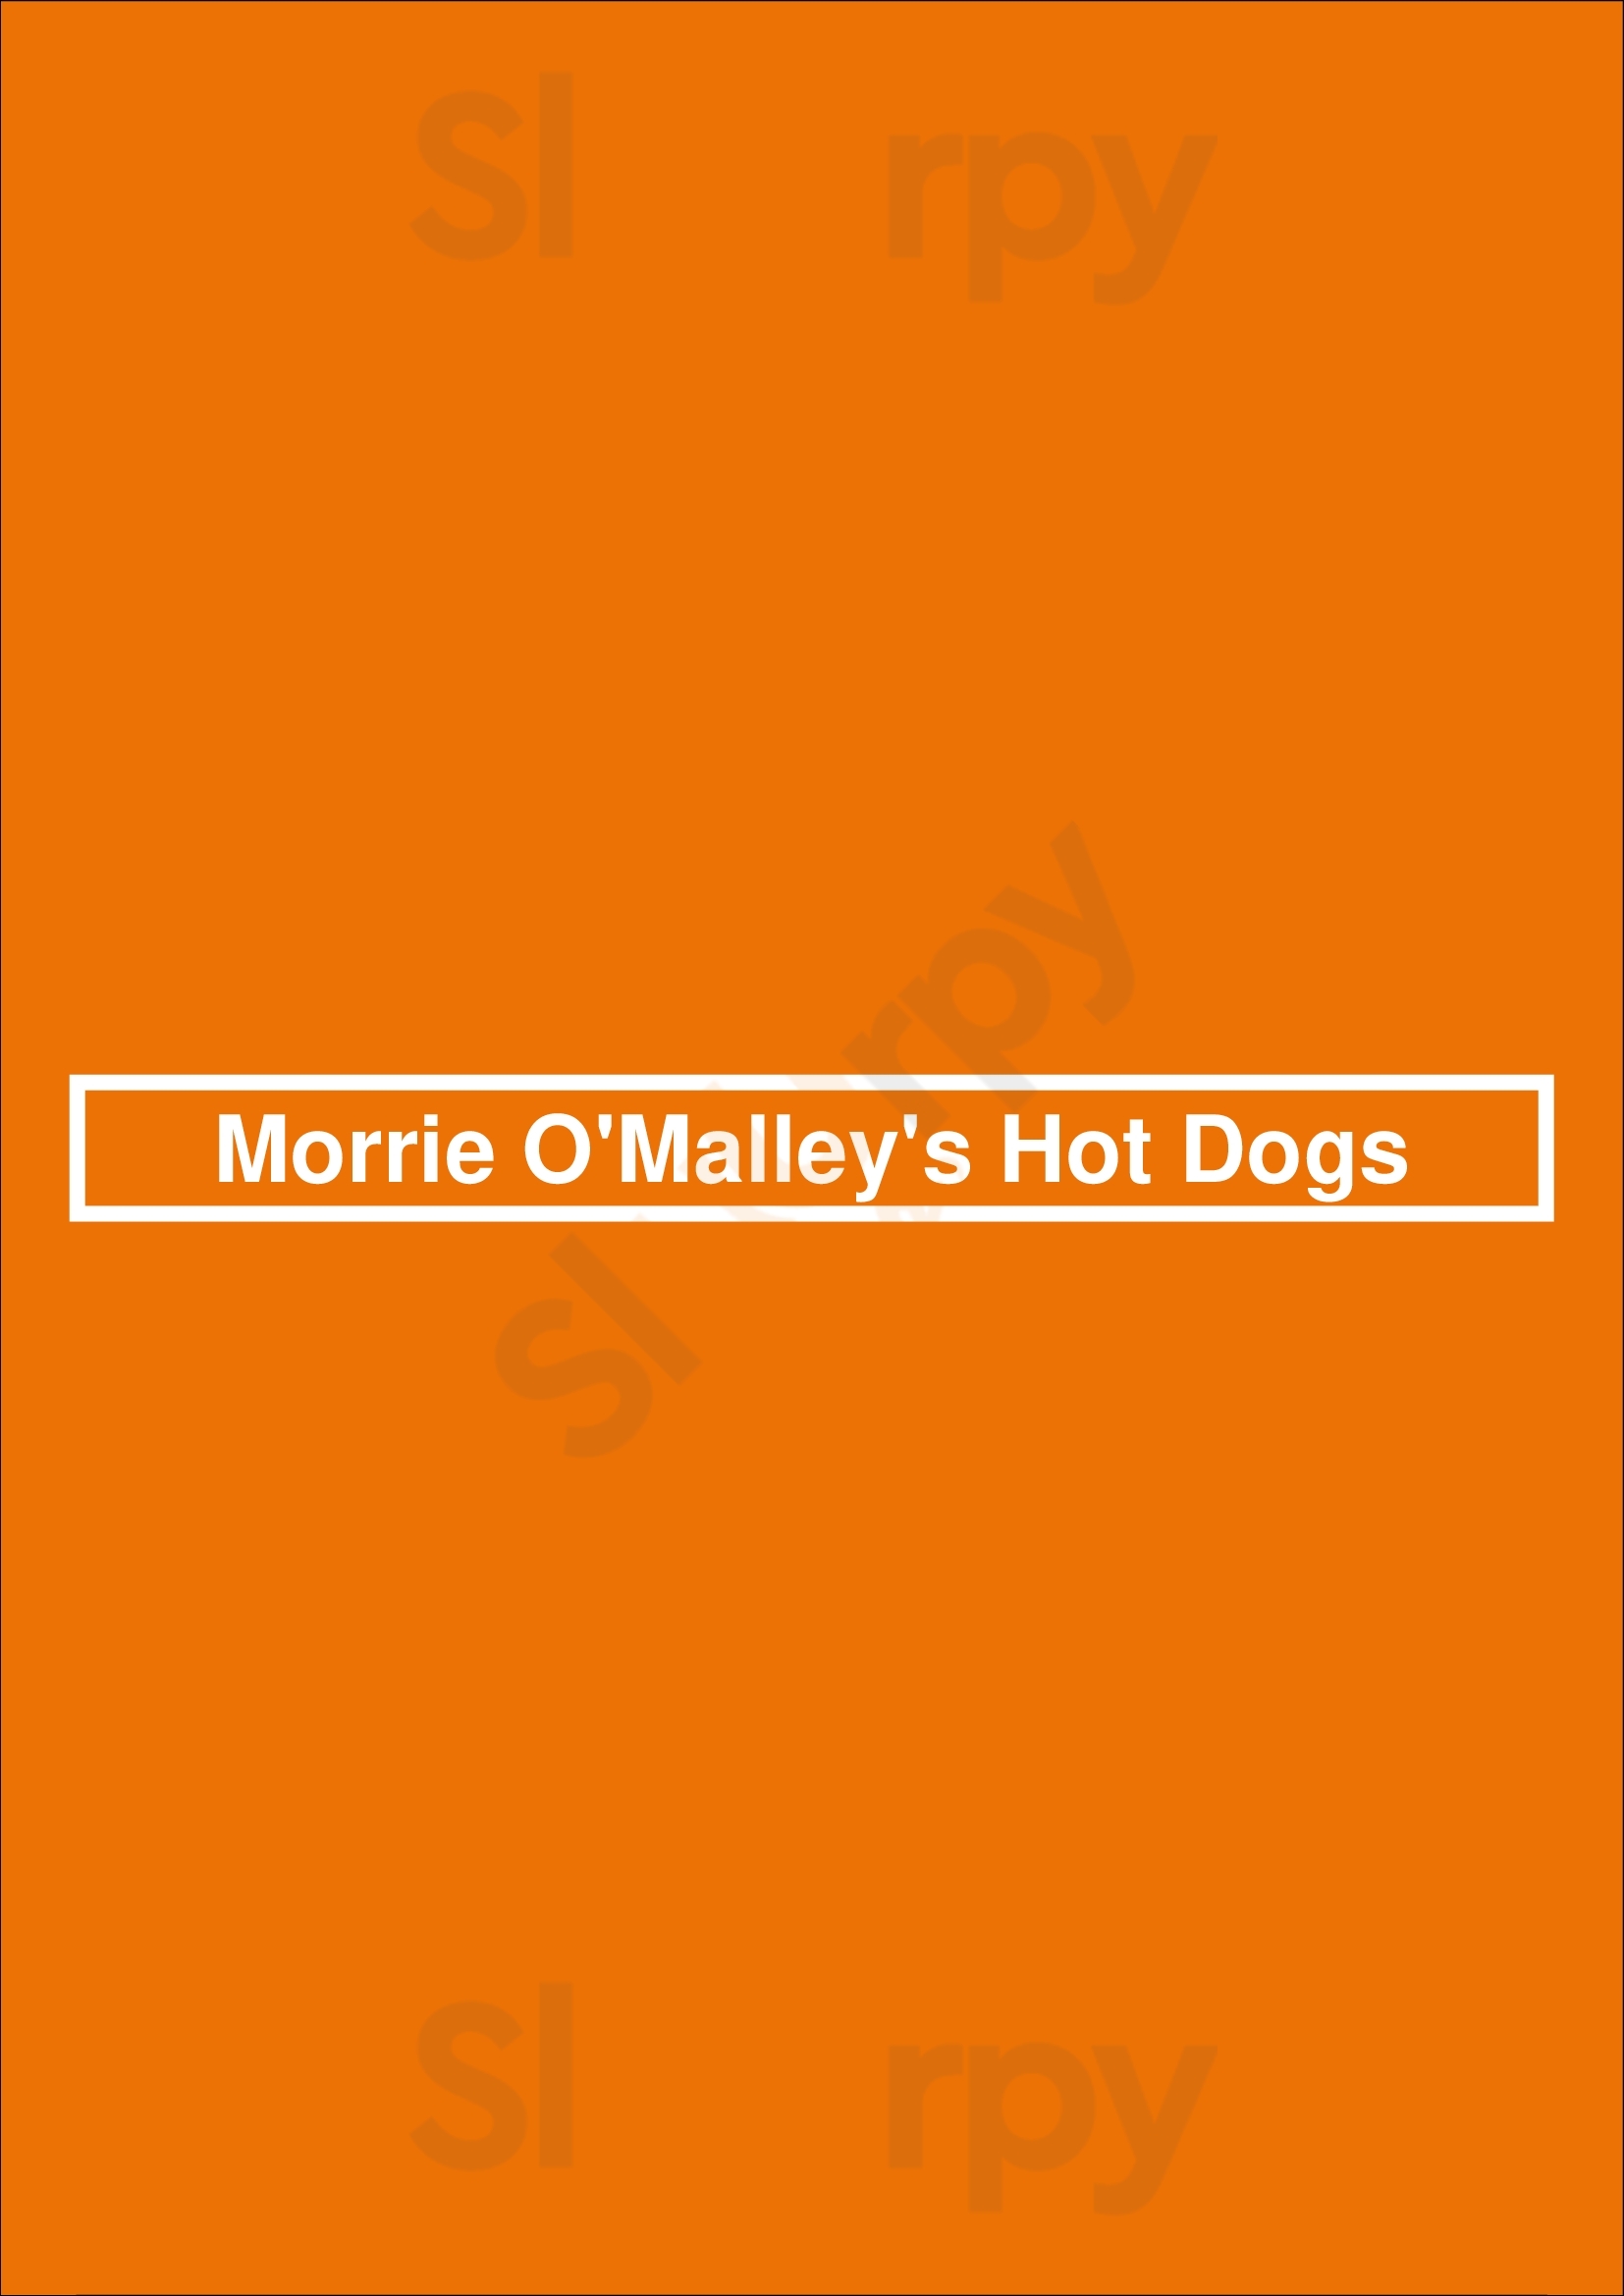 Morrie O'malley's Hot Dogs Chicago Menu - 1